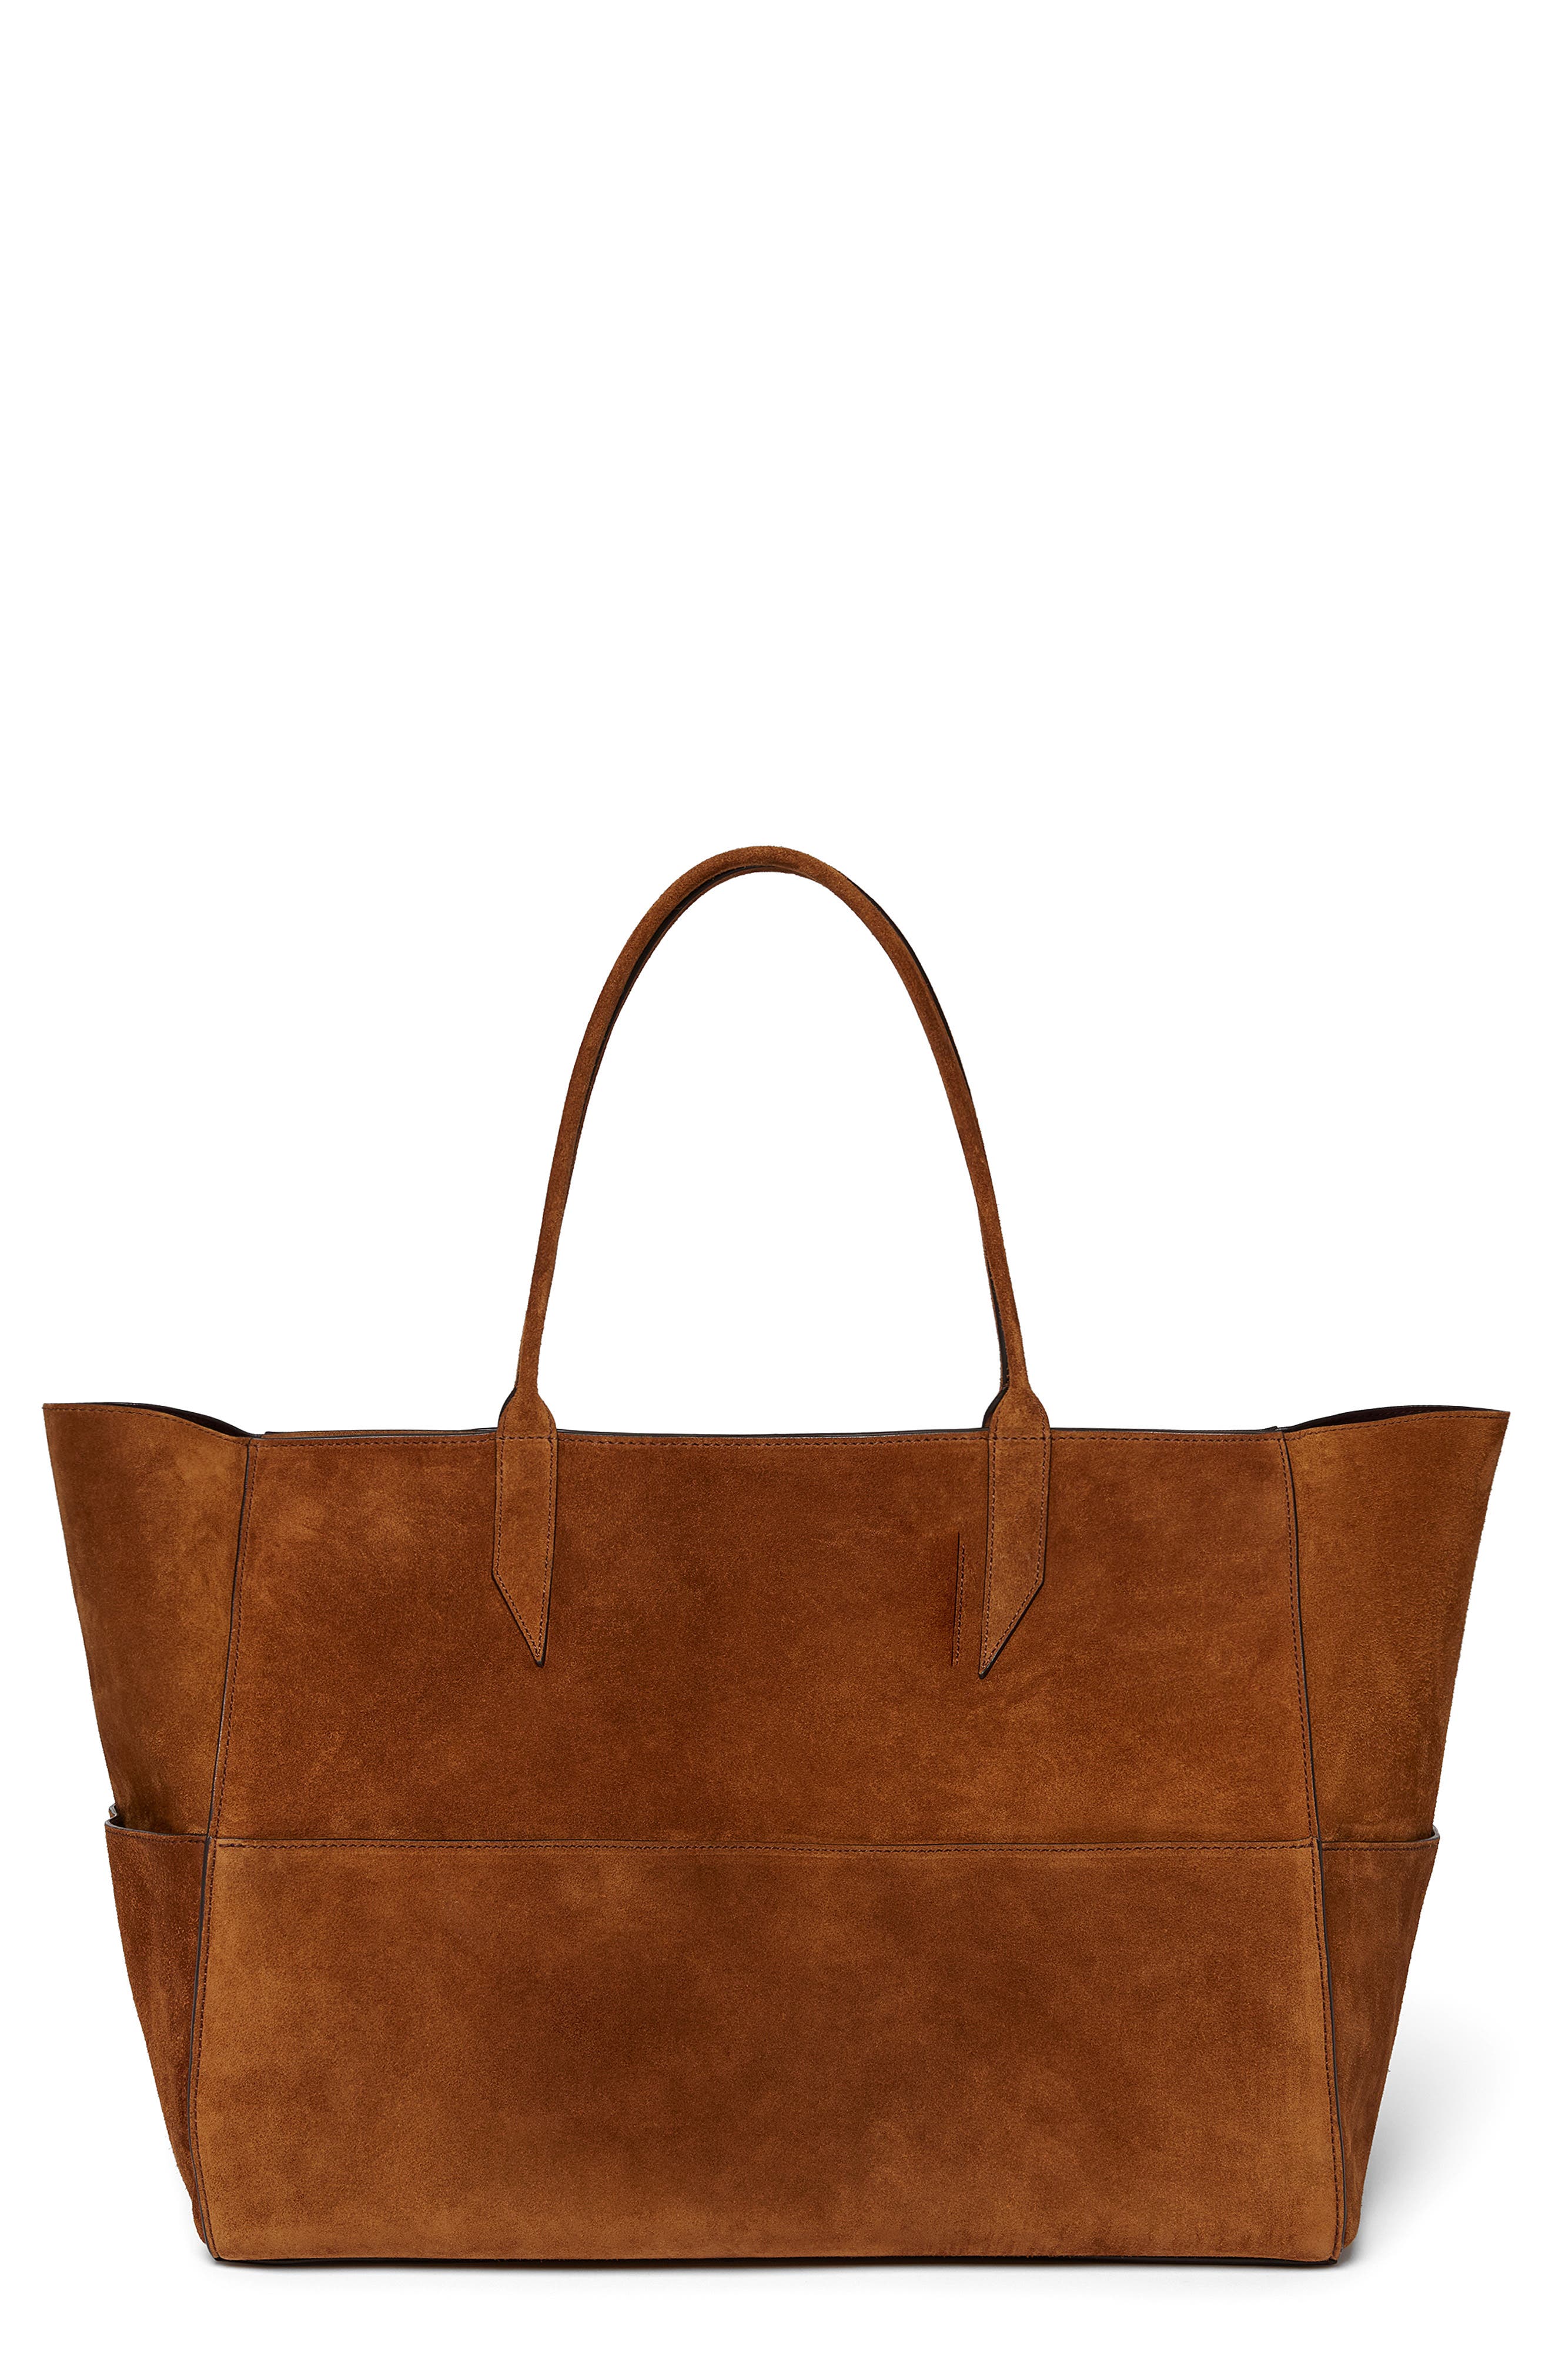 Incognito Cabas large suede tote